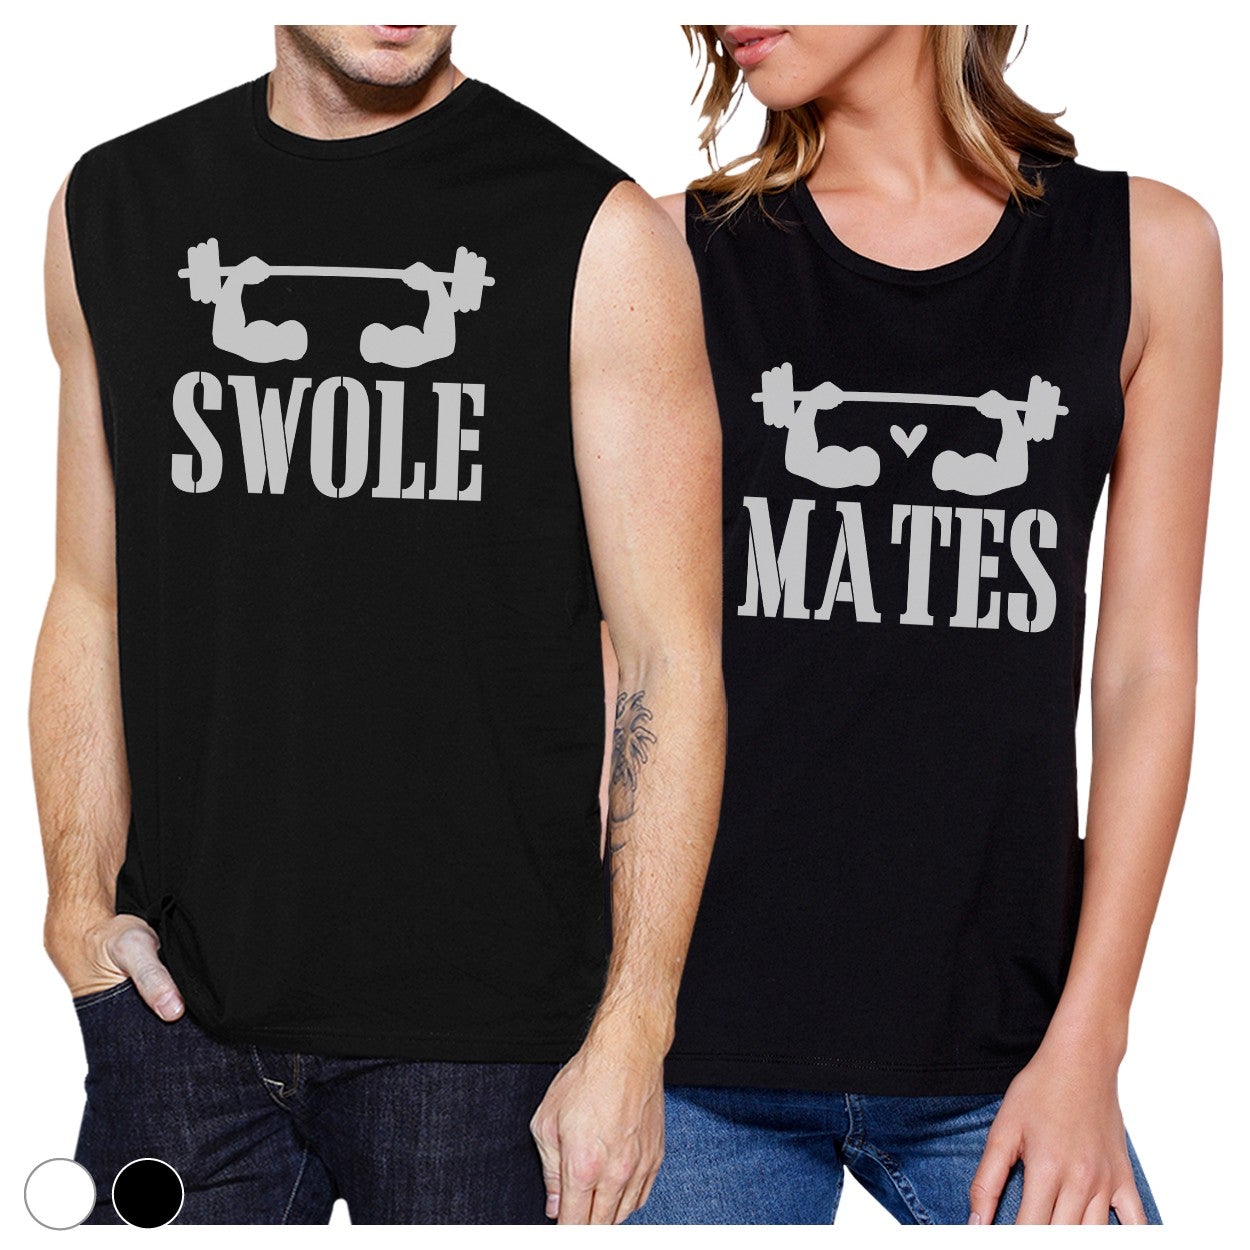 Swole Mates Funny Workout Tops Funny Matching Gifts Couple Muscle Tops Black